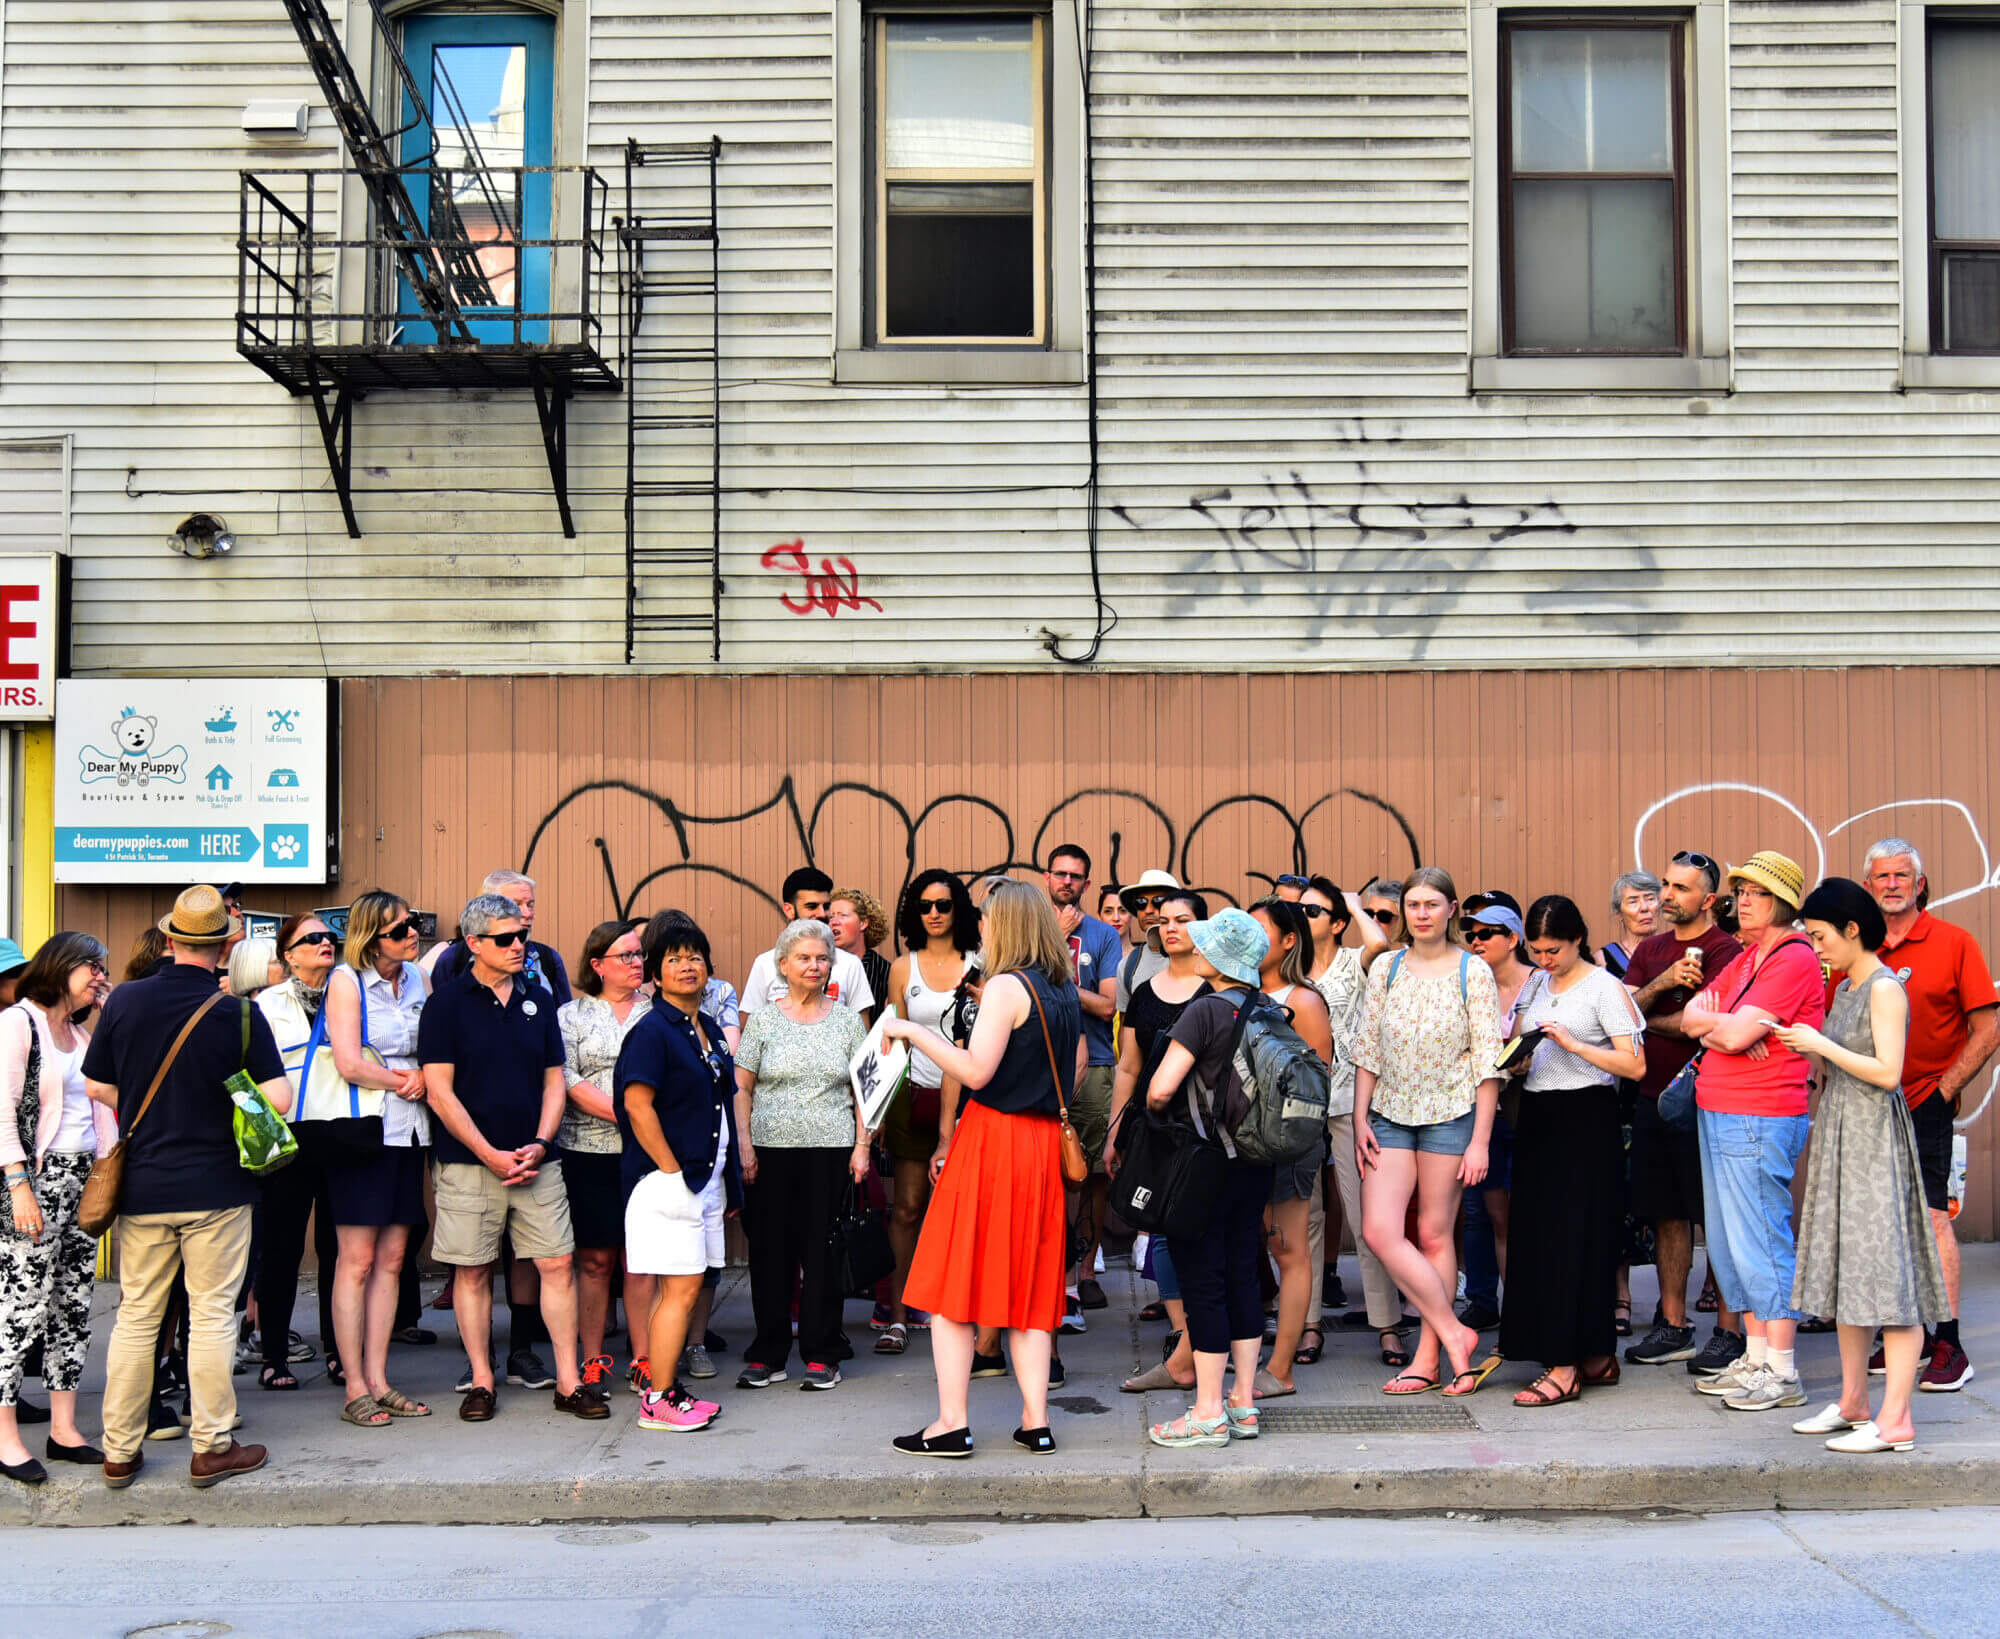 A large group of people stand on a sidewalk. Behind them is a building with some graffiti and storefront signs partially visible, along with a fire escape ladder system.